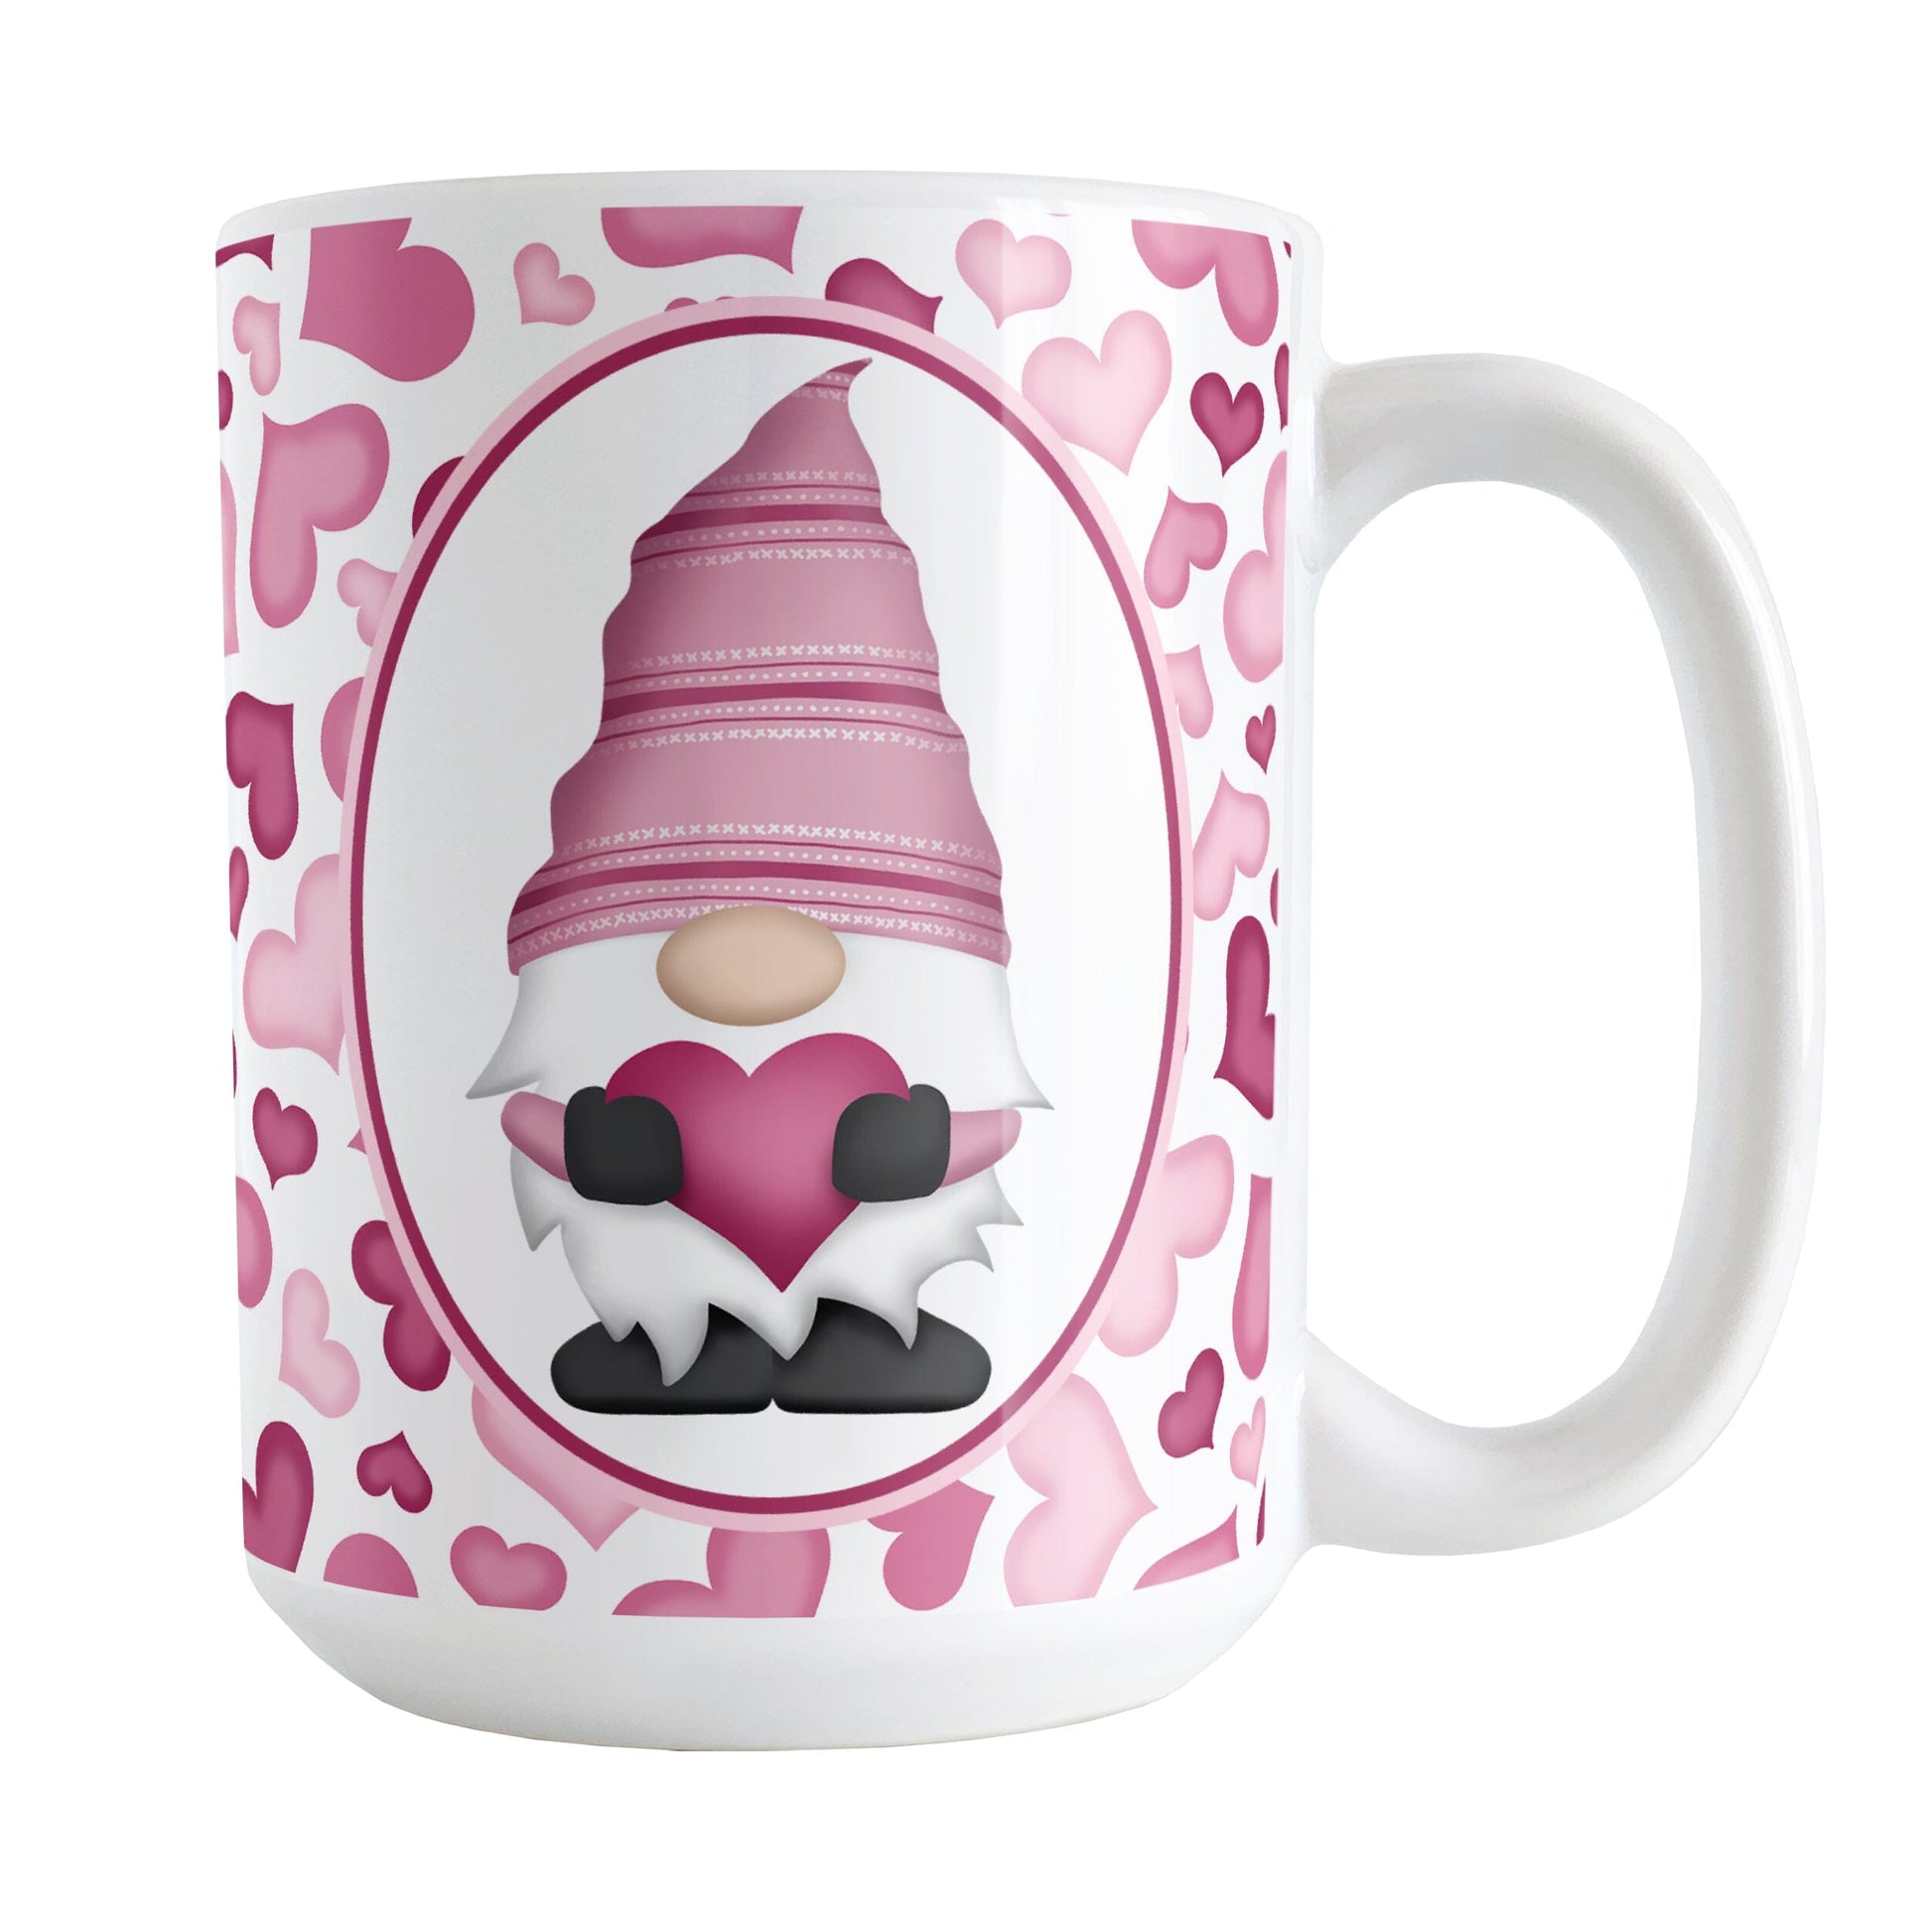 Pink Gnome Hearts Mug (15oz) at Amy's Coffee Mugs. A ceramic coffee mug designed with an adorable pink gnome in a white oval on both sides of the mug over a pattern of cute hearts in different shades of pink that wrap around the mug to the handle.